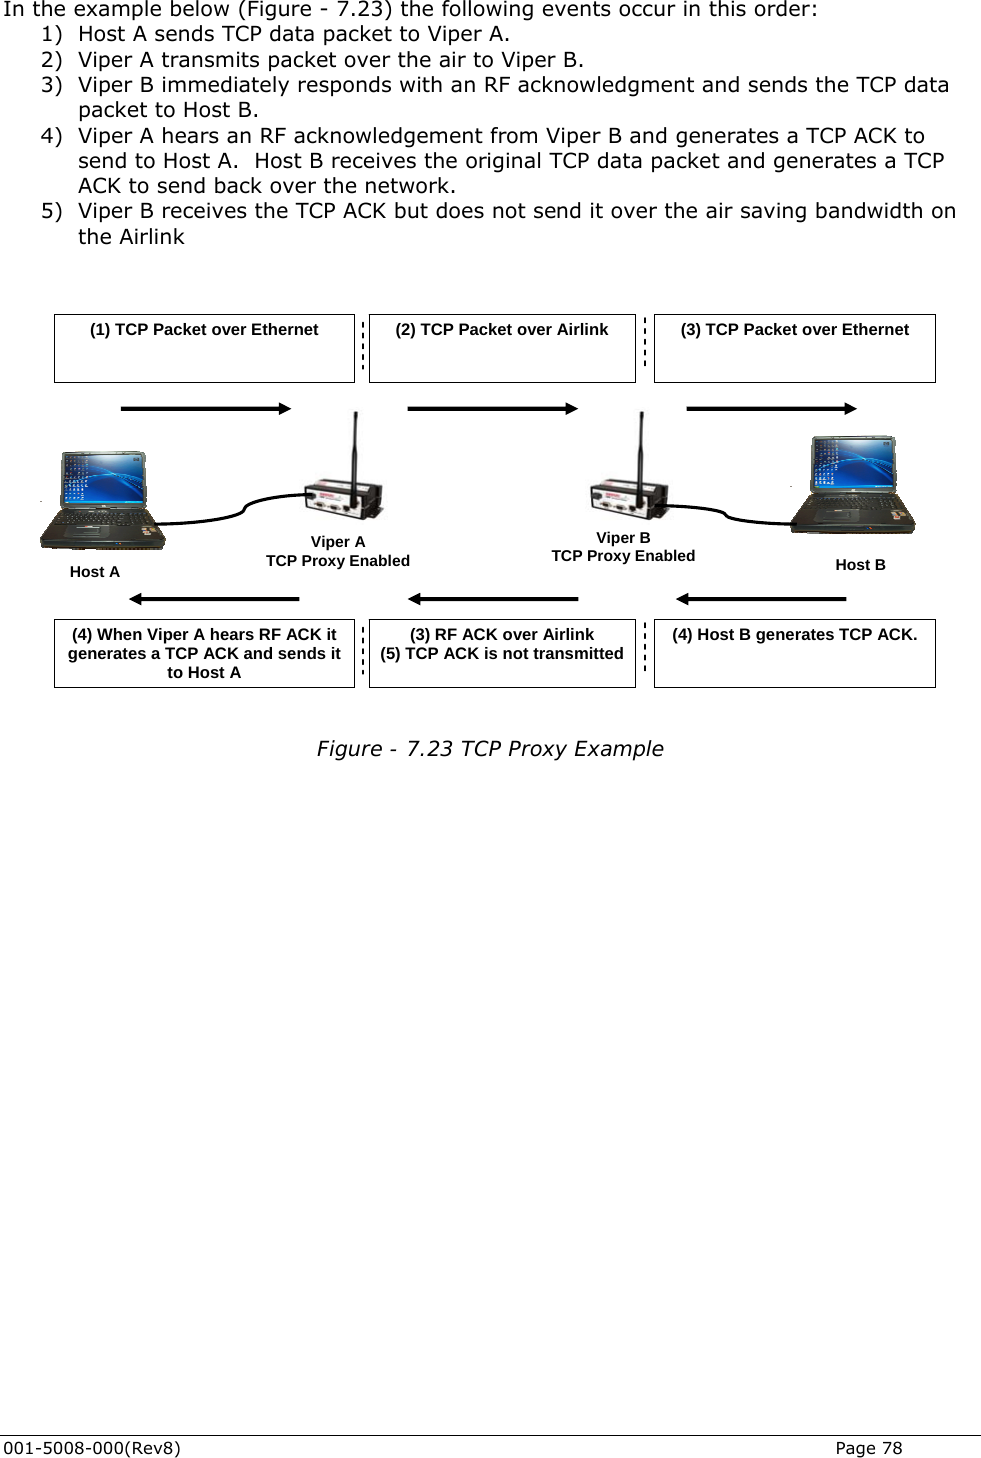  In the example below (Figure - 7.23) the following events occur in this order: 1) Host A sends TCP data packet to Viper A. 2) Viper A transmits packet over the air to Viper B. 4) Viper A hears an RF acknowledgement from Viper B and generates a TCP ACK to ives the original TCP data packet and generates a TCP ACK to send back over the network. t does not send it over the air saving bandwidth on   ample 3) Viper B immediately responds with an RF acknowledgment and sends the TCP data packet to Host B. send to Host A.  Host B rece5) Viper B receives the TCP ACK buthe Airlink     (1) TCP Packet over Ethernet  (2) TCP Packet over Airlink  (3) TCP Packet over Ethernet 001-5008-000(Rev8)   Page 78   Host A   Host B  Viper ATCP Proxy Enabled Viper B TCP Proxy Enabled           (4) When Viper A hears RF ACK it generates a TCP ACK and sends it to Host (3) RF ACK over Airlink (5) TCP ACK is not transmitted  (4) Host B generates TCP ACK.     A Figure - 7.23 TCP Proxy Ex   